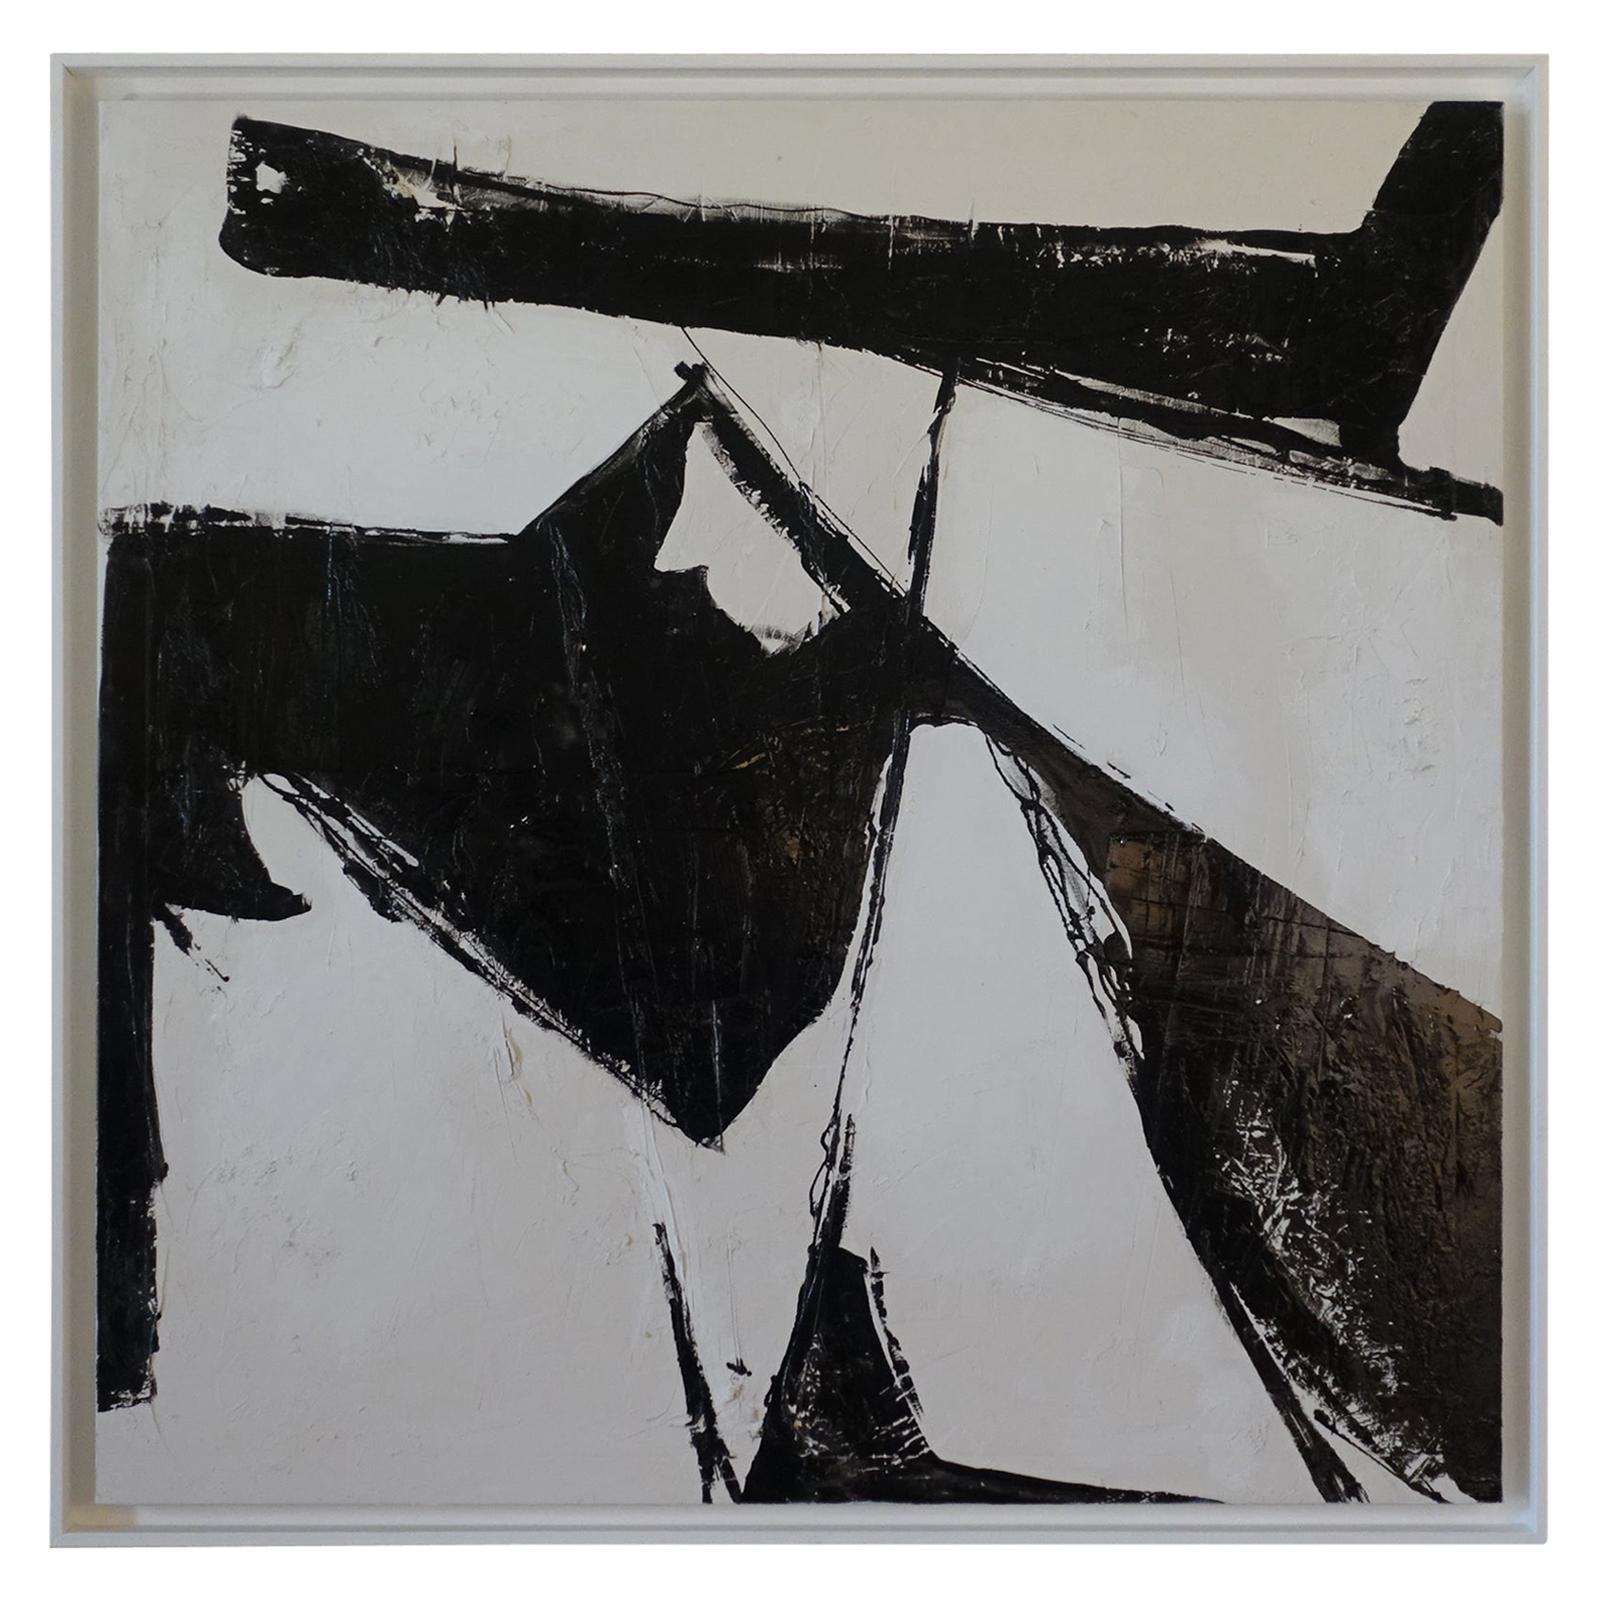 Abstract Black and White Mixed Media Painting, Davide Serio, Italy, 2021